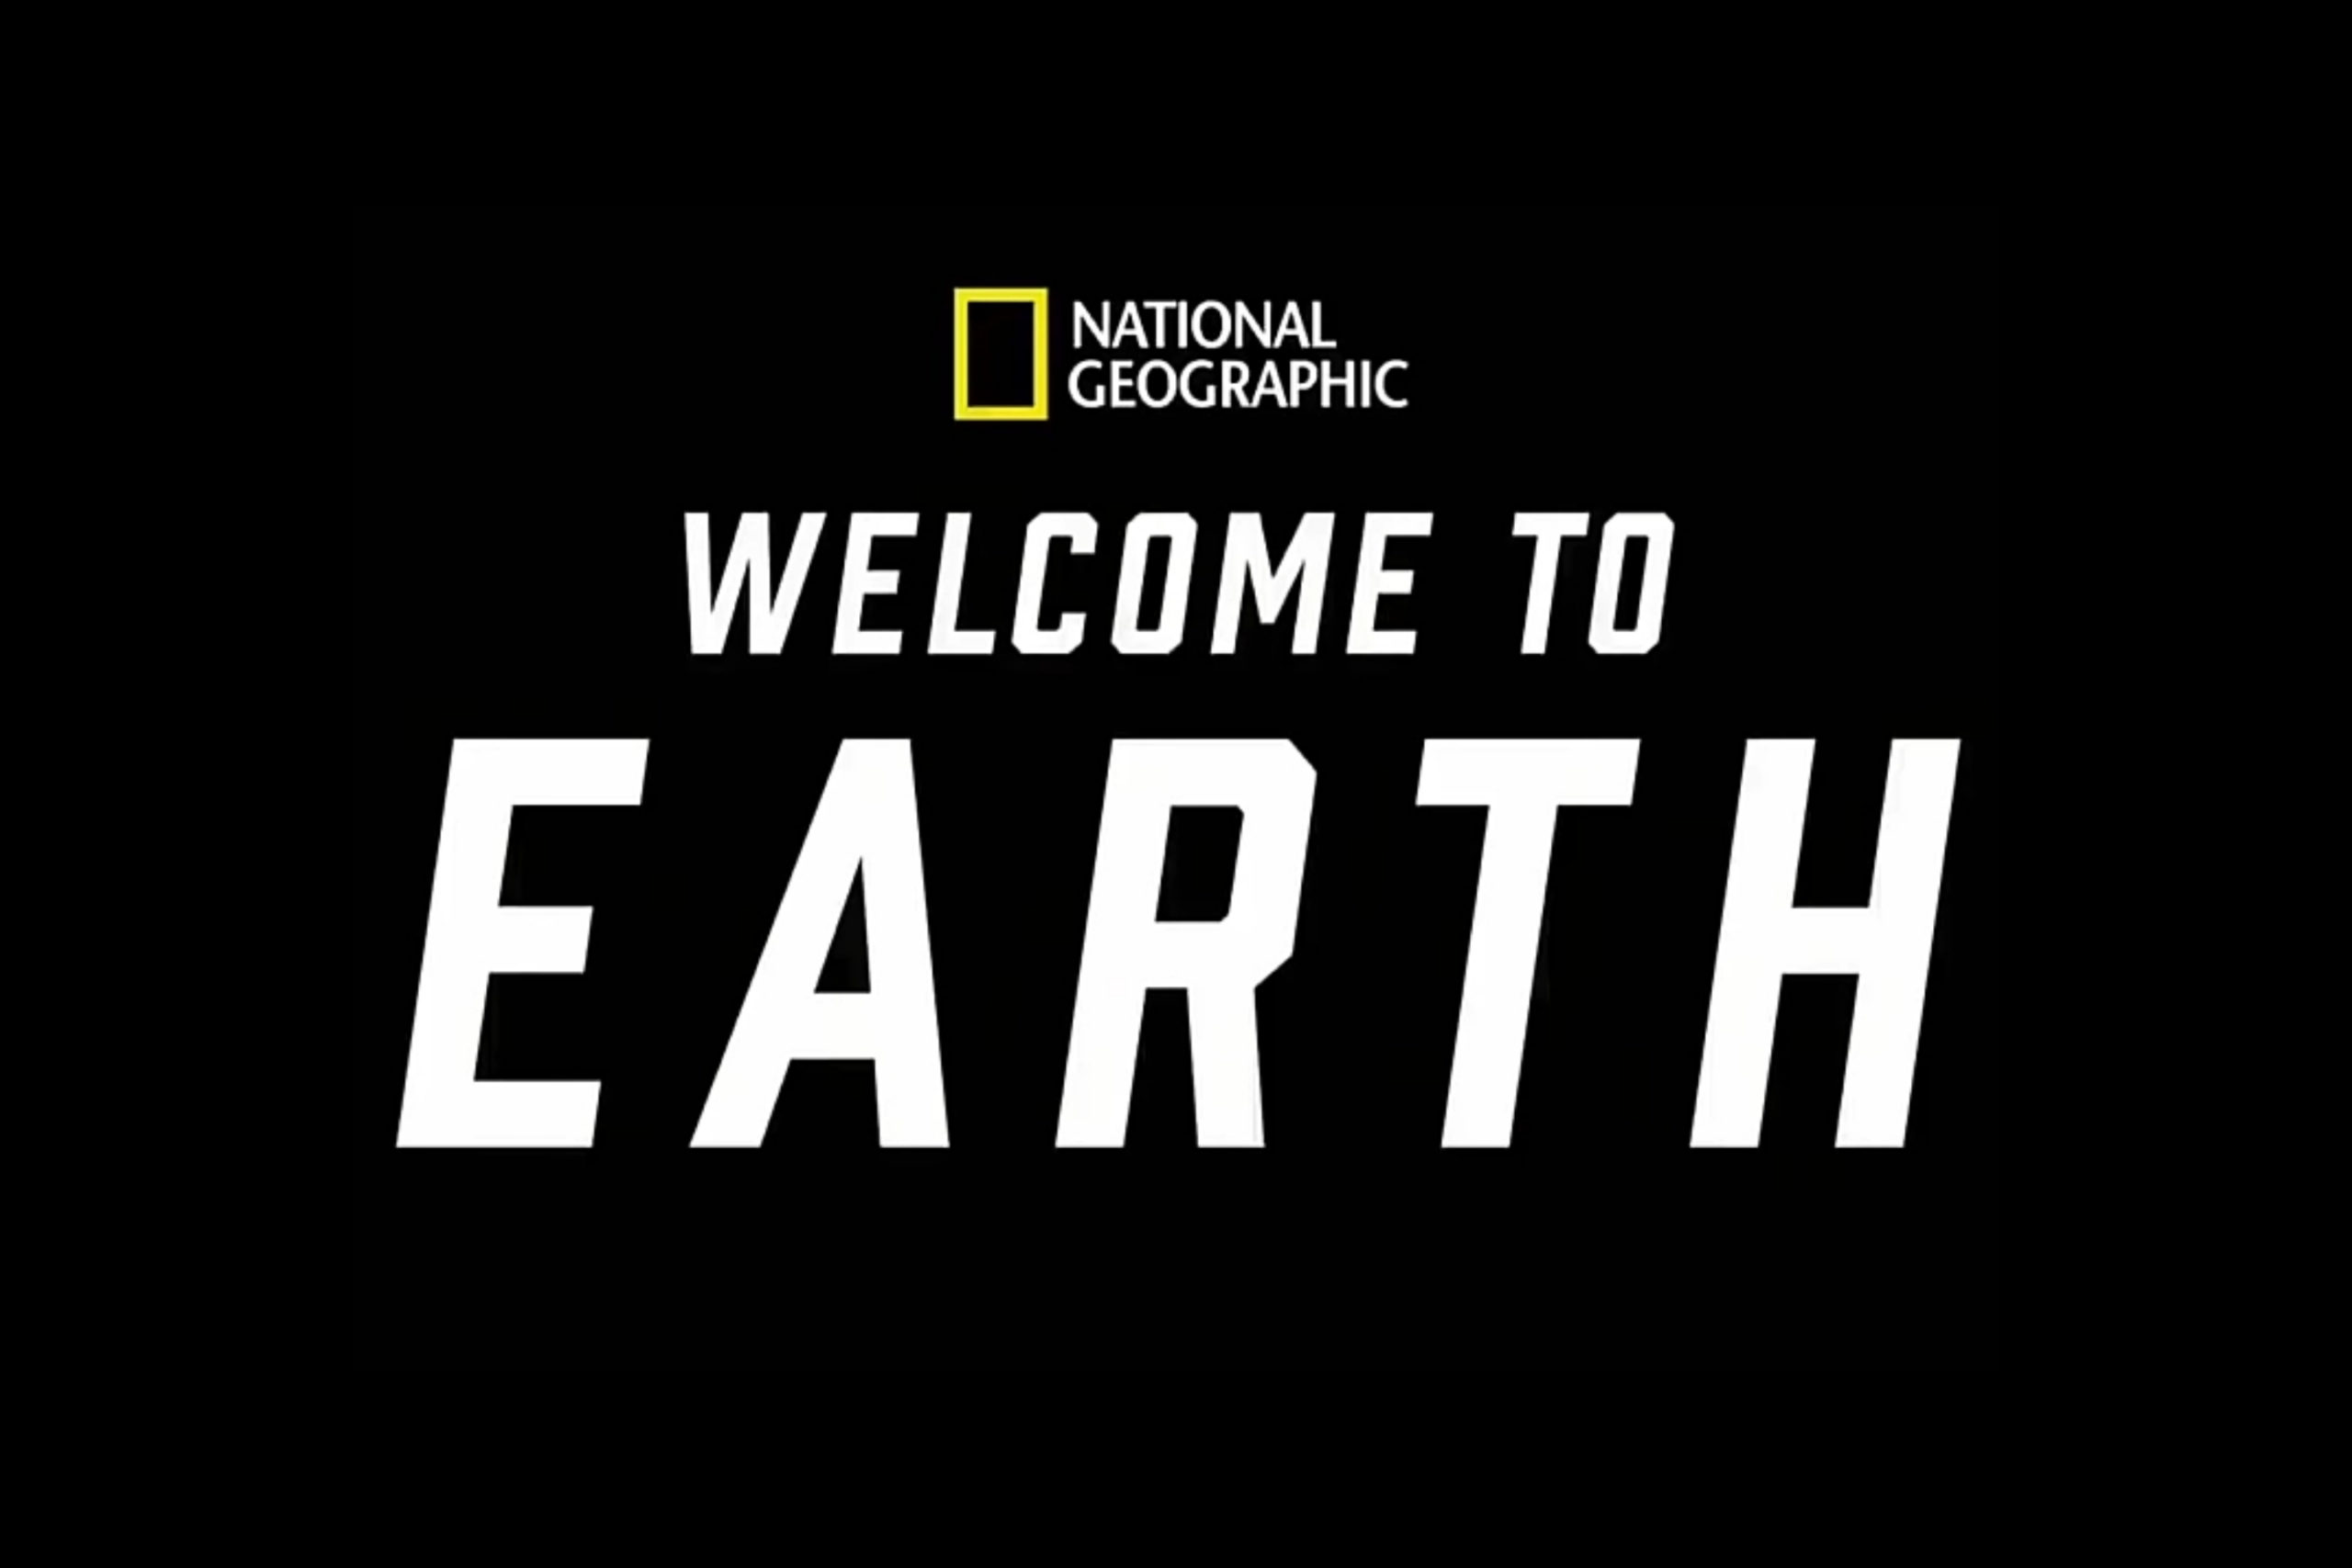 welcome to earth